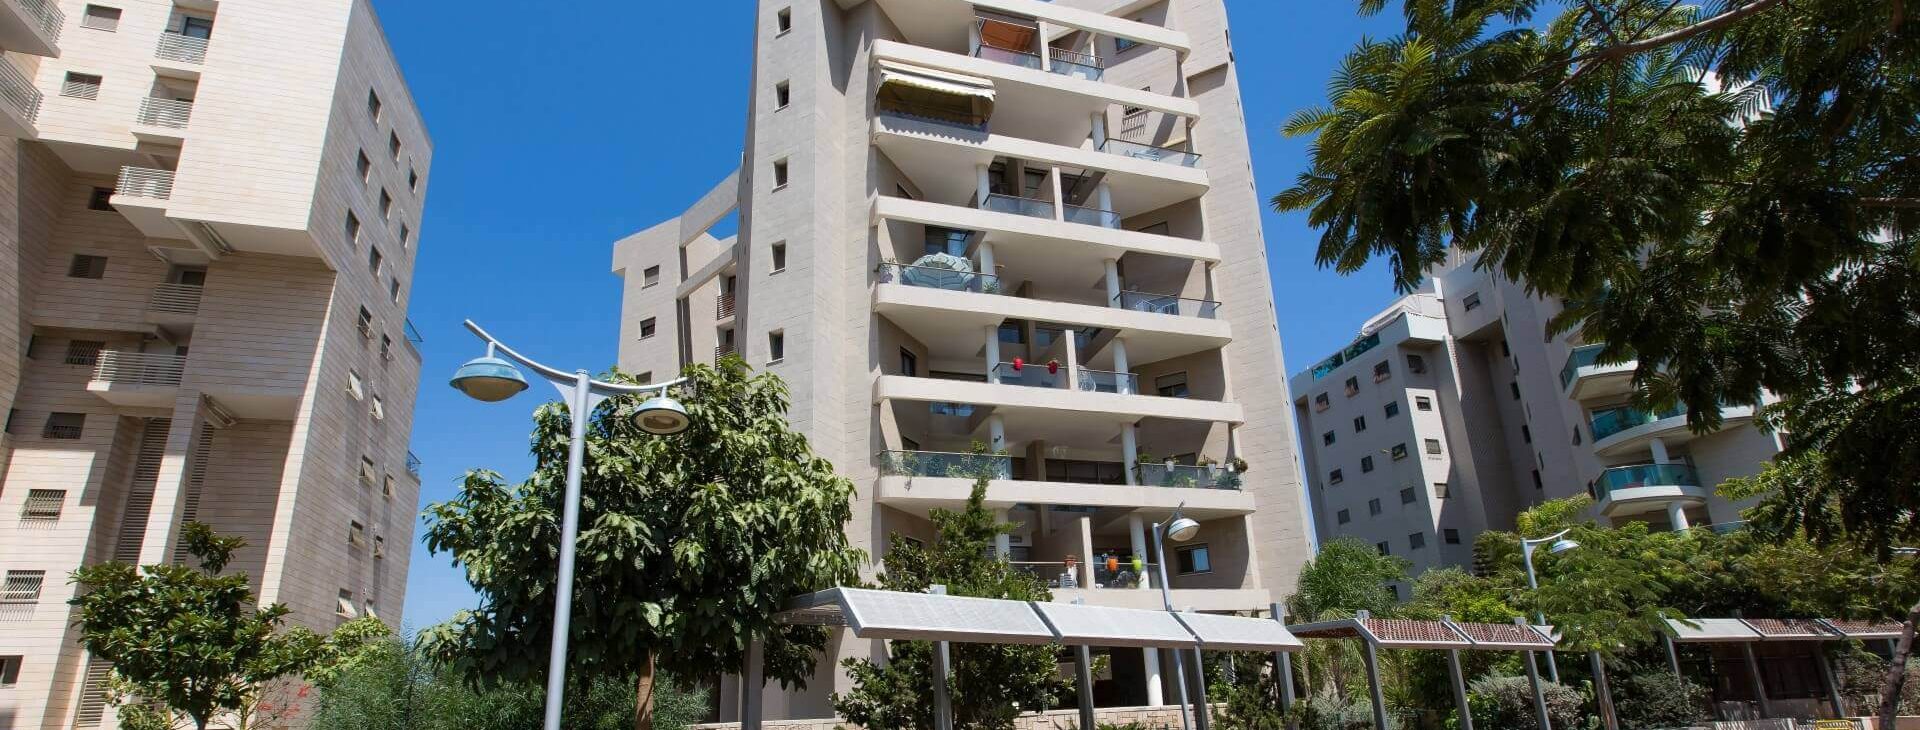 Photograph of a residential building in the Central Park project in Holon